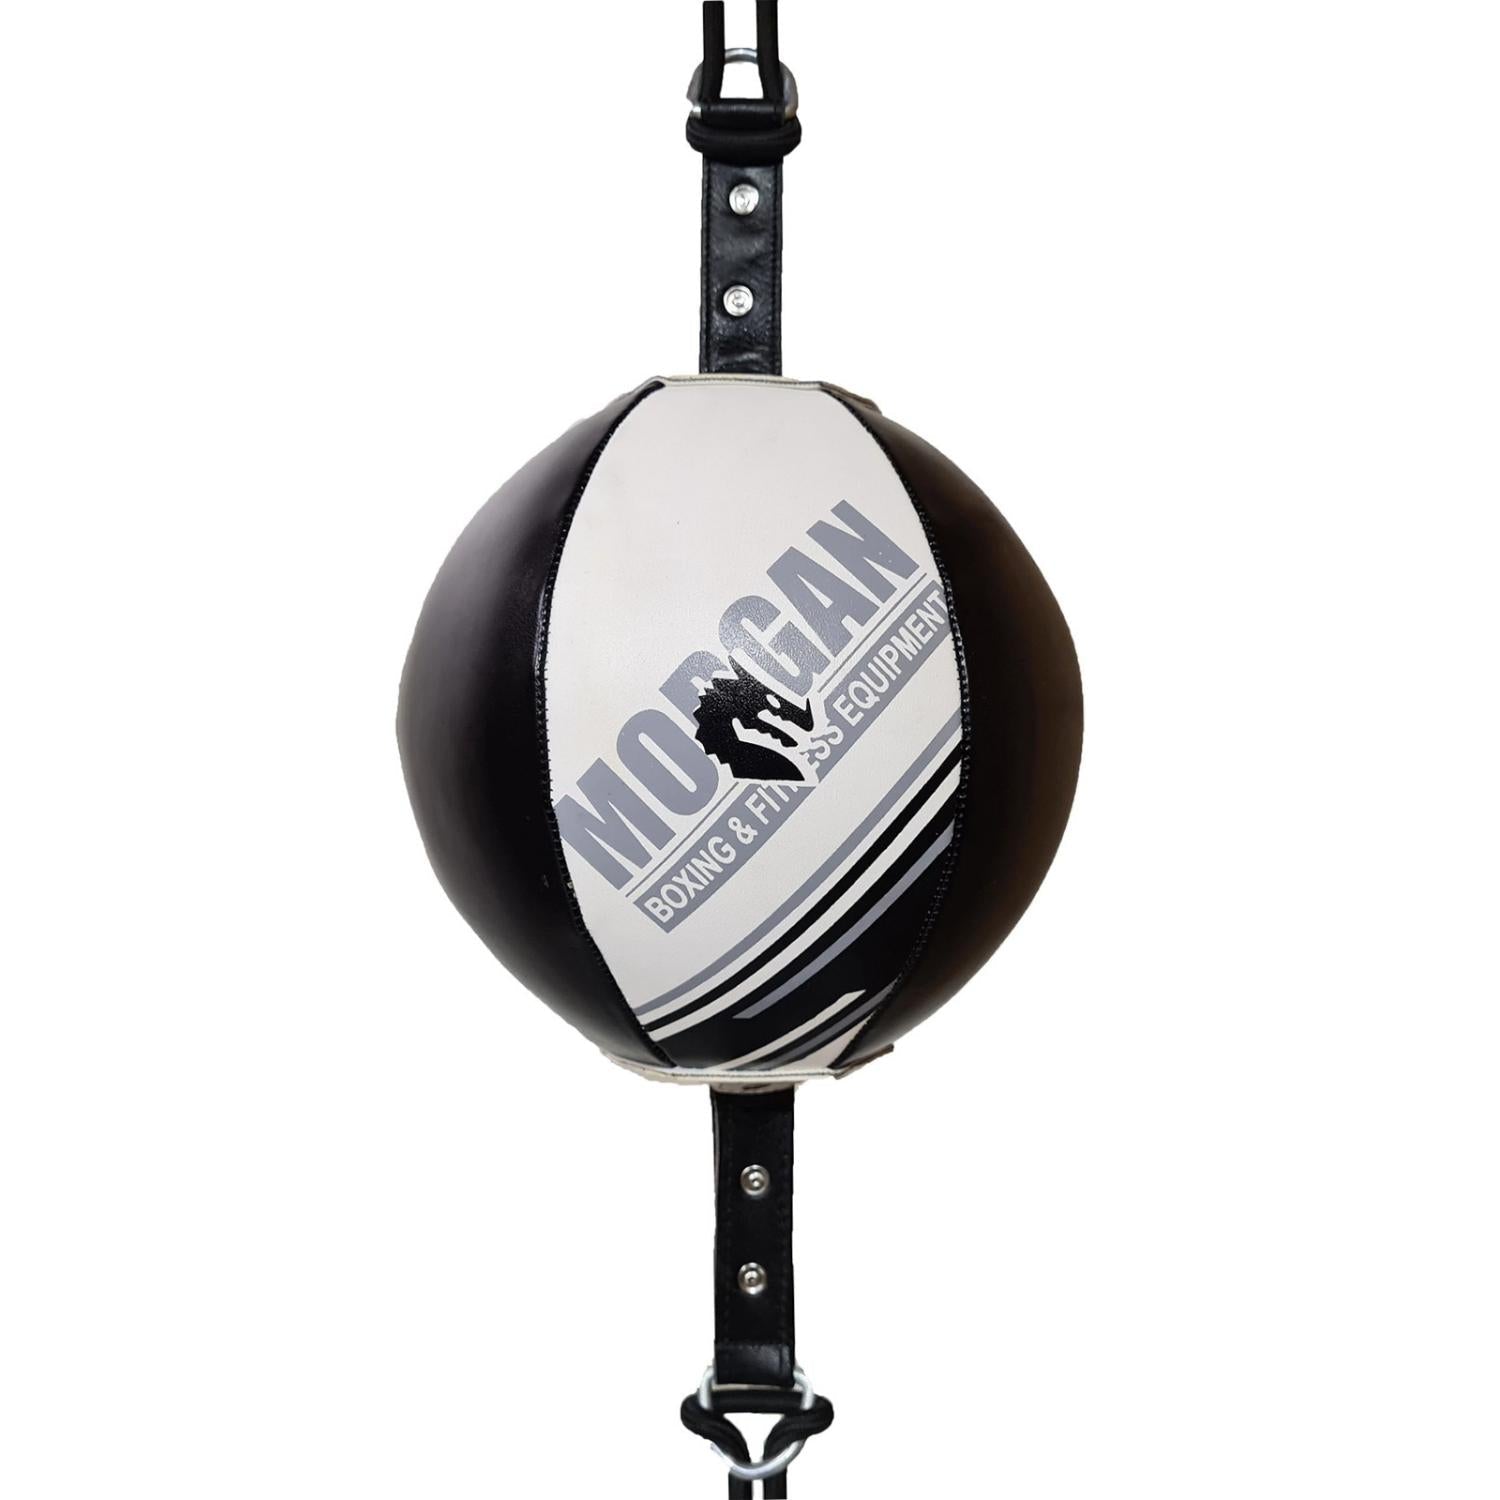 The Fitness Hero Aventus rounded floor-to-ceiling ball from Morgan Sports is also called "double-ended punch bag" is one of the essential pieces of any boxing studio.18cm x 18cm with an additional 10 cm per end riveted in attachment straps Comes with a rubber bungee cord for adjustability and calibration